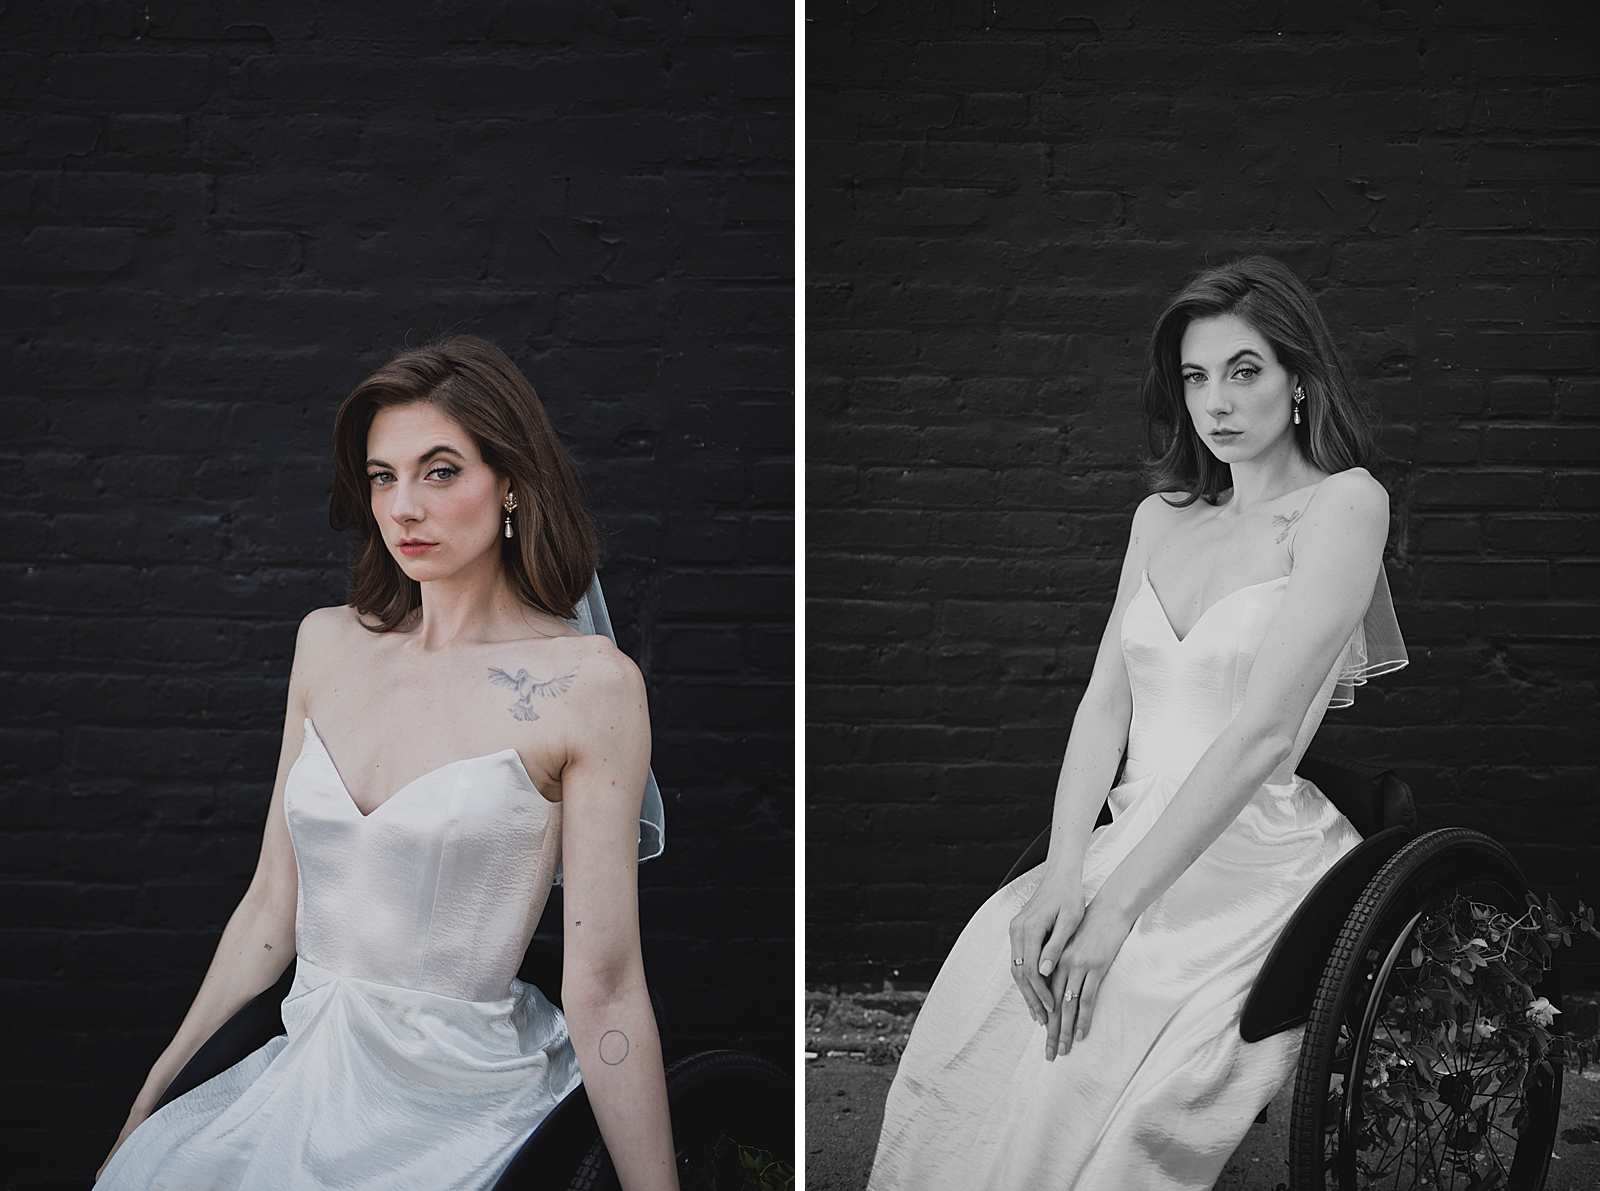 Left photo: Upper body shot of the bride posing in front of a black brick wall. 
Right photo: Black and white shot of the bride posing in front of a black brick wall. 